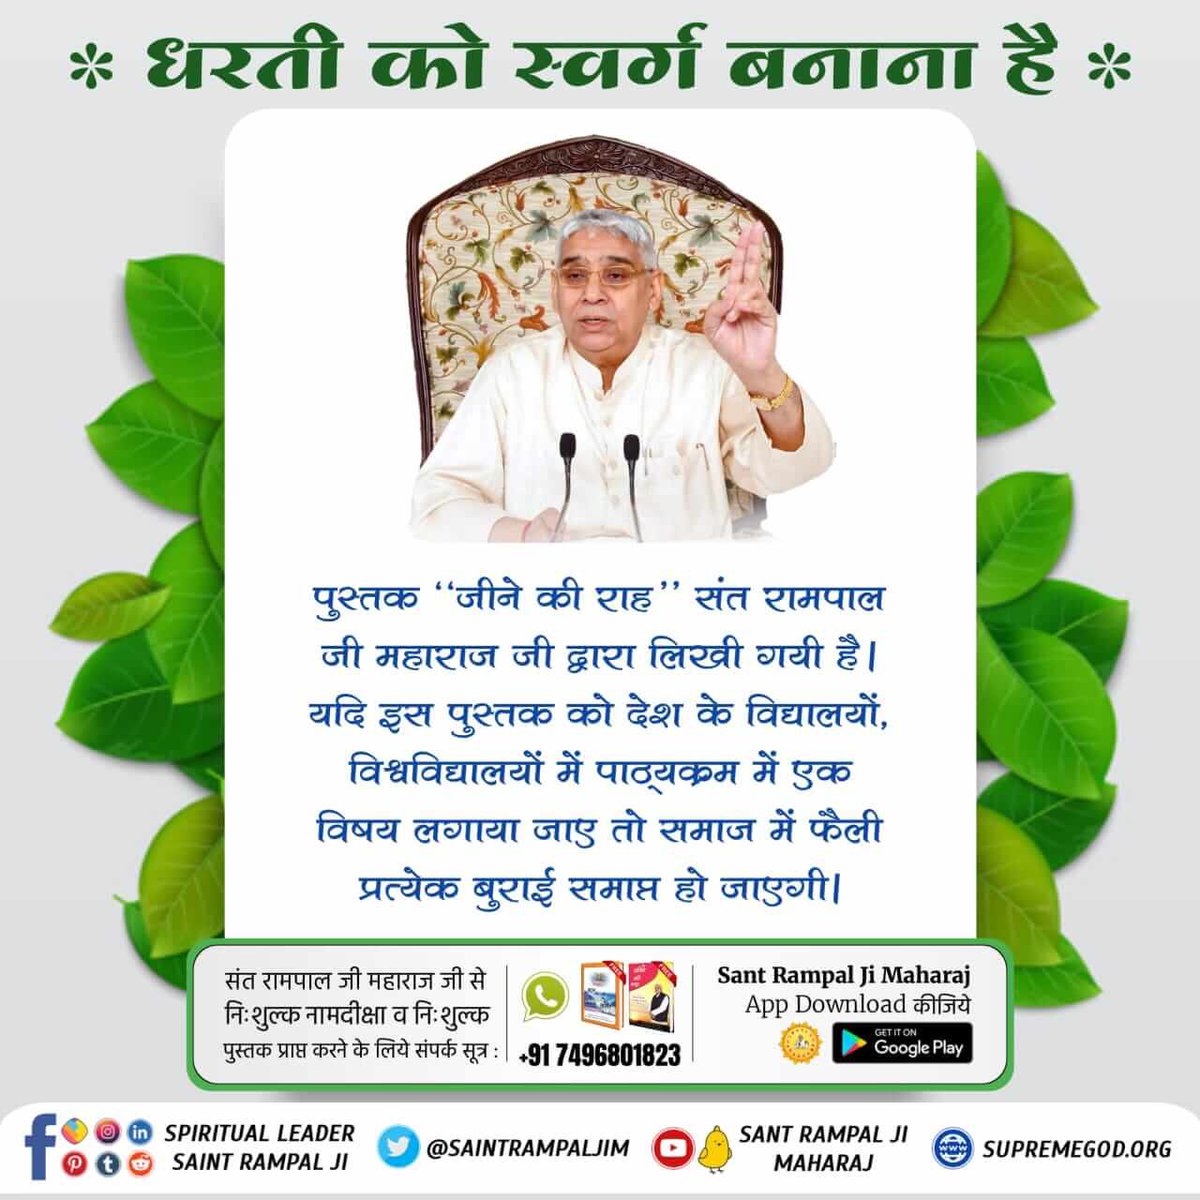 You are requested to listen to the holy spiritual discourses of Saint Rampal Ji Maharaj Ji. The knowledge shared by them is the only truth in this world. Ultimately, we all will have to follow this path in order to attain peace & salvation. #GodMorningFriday #FridayThoughts